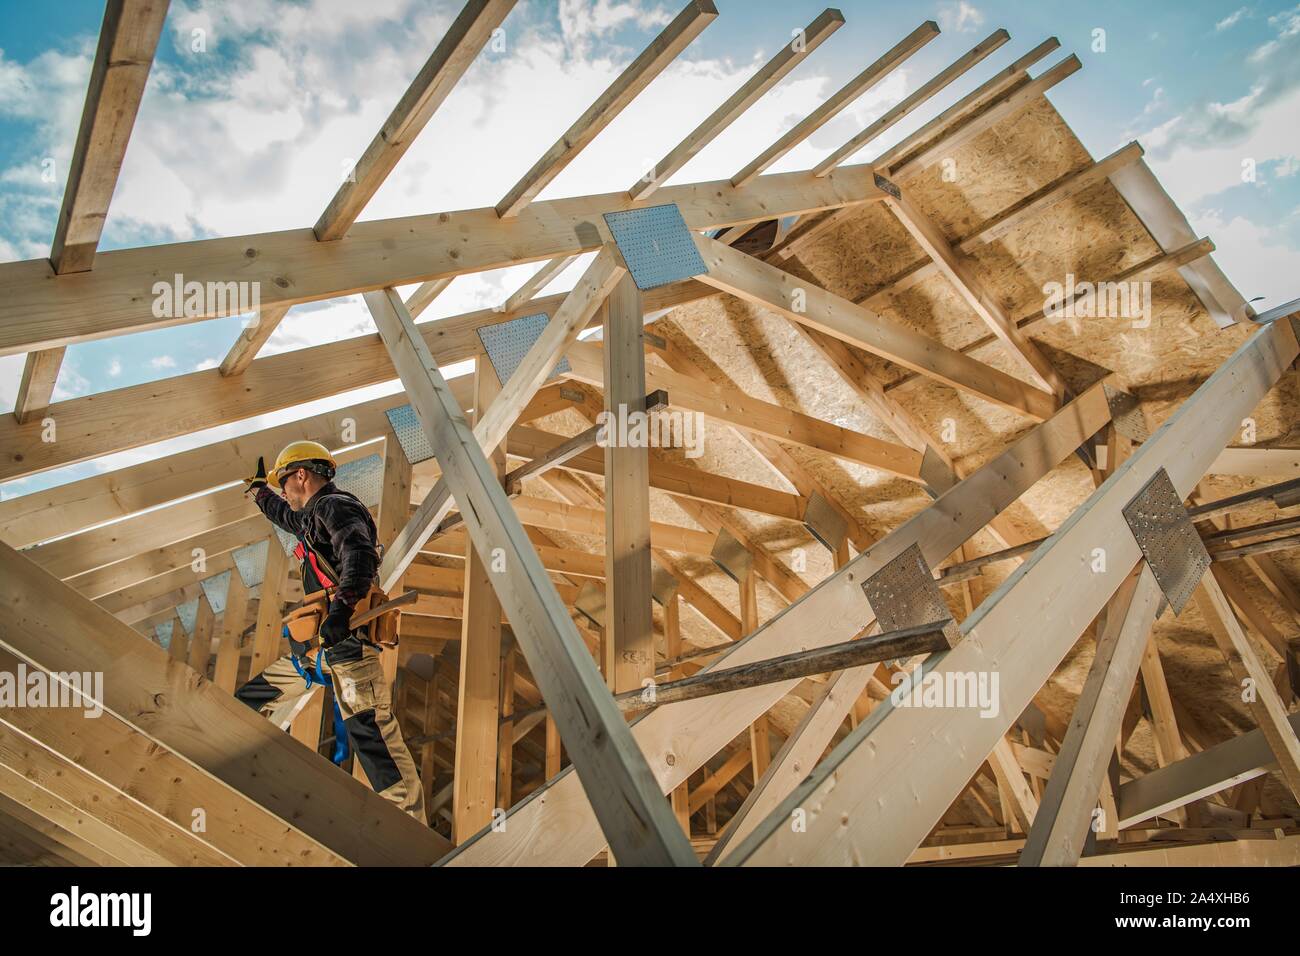 New Wooden Residential Building Developing. Caucasian Contractor Worker and the Wood Frame Installation. Construction Industry. Stock Photo